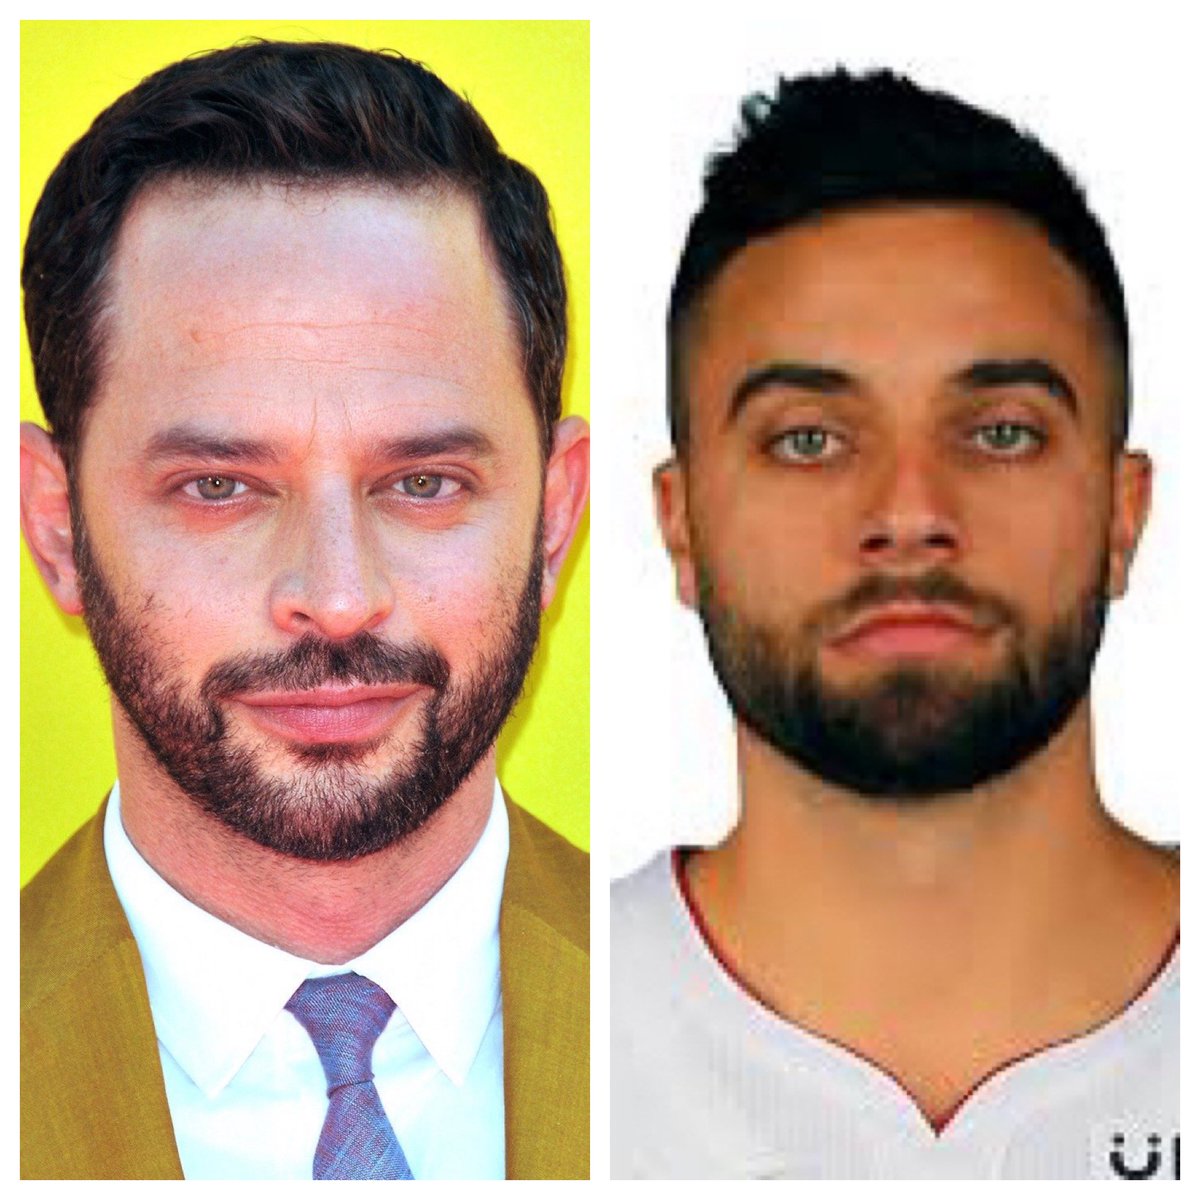 Max Strus looks like @nickkroll if he used one of those yassify filters